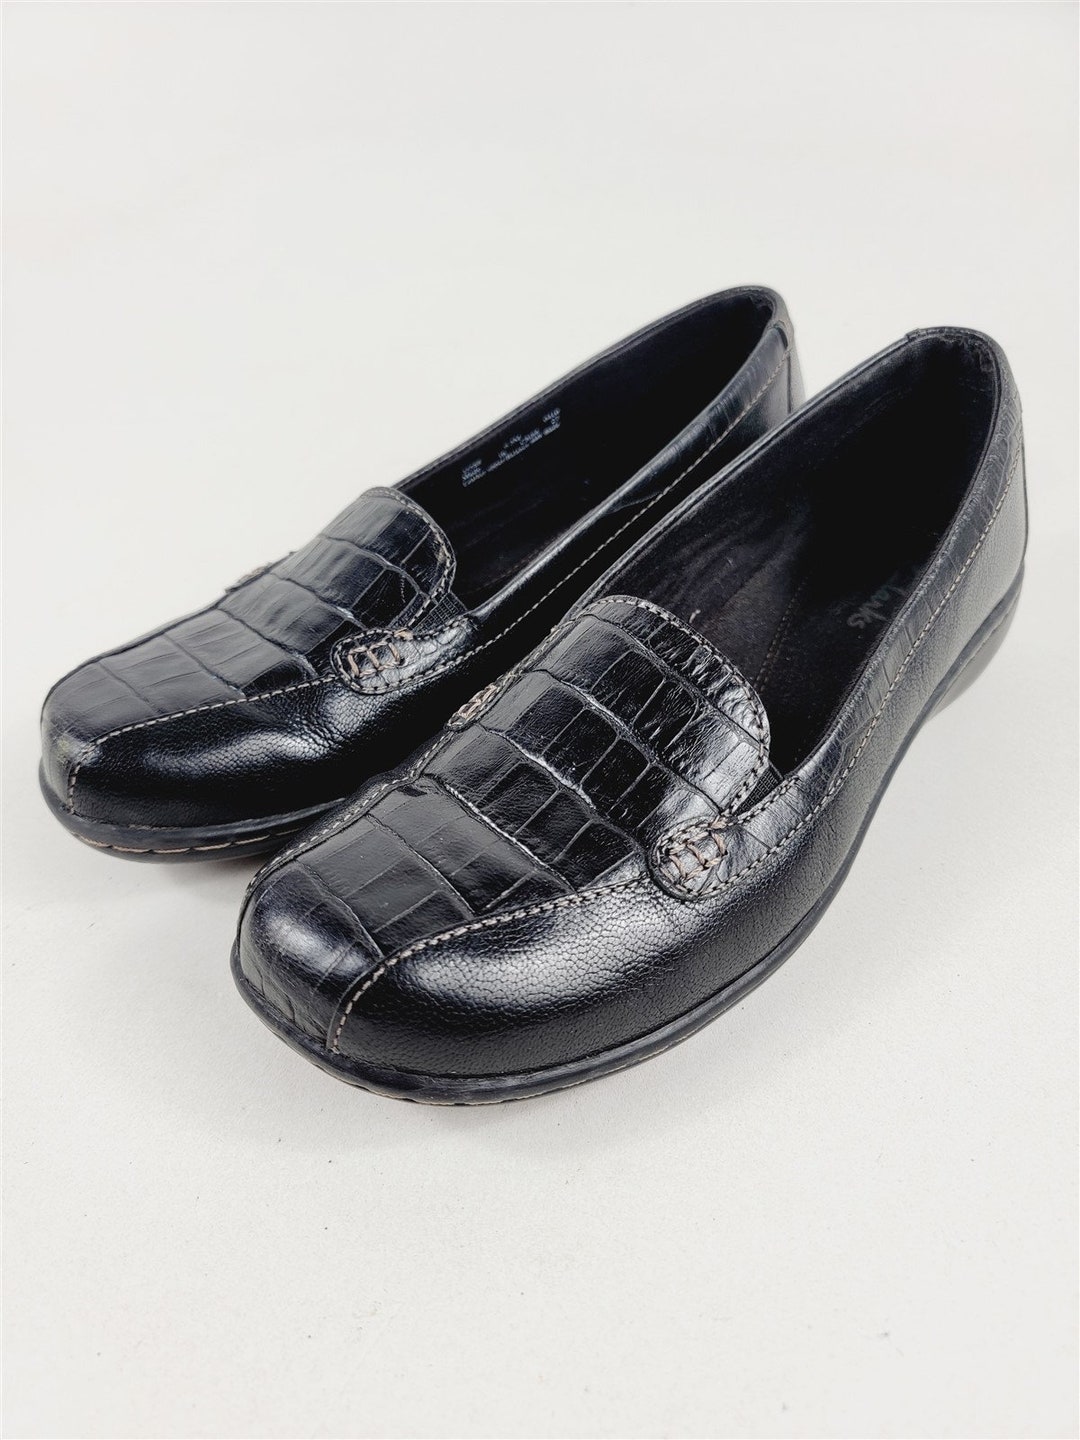 Clarks Bendables Loafers Shoes Slip on Croc Black Leather - Etsy